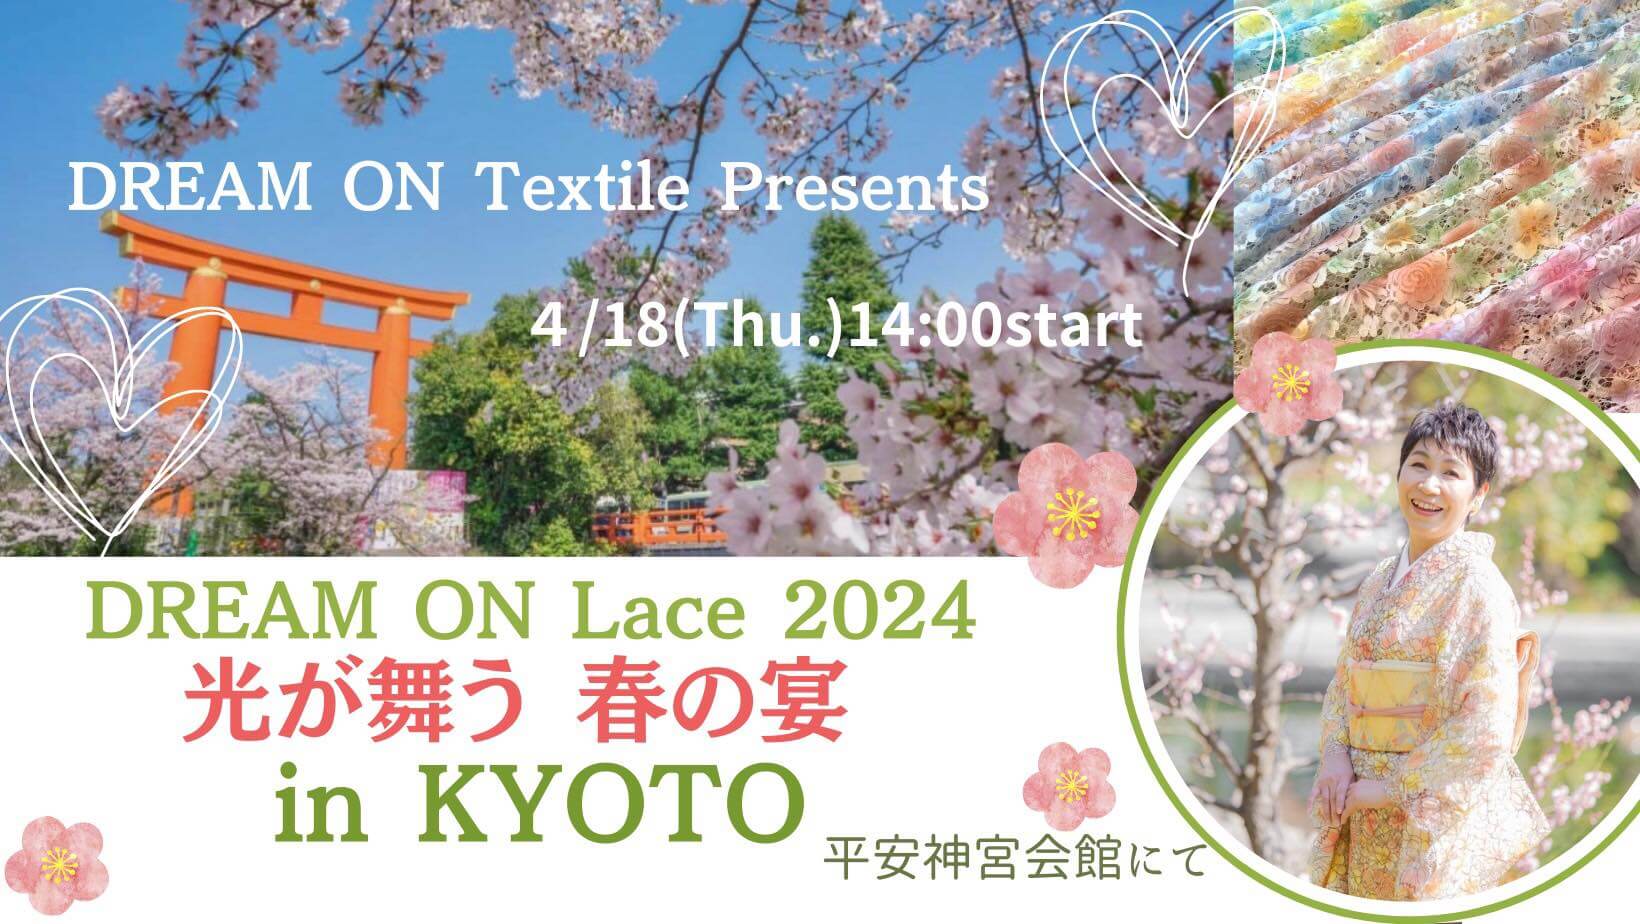 DREAM ON Lace 2024 光を纏う 春の宴 in Kyoto